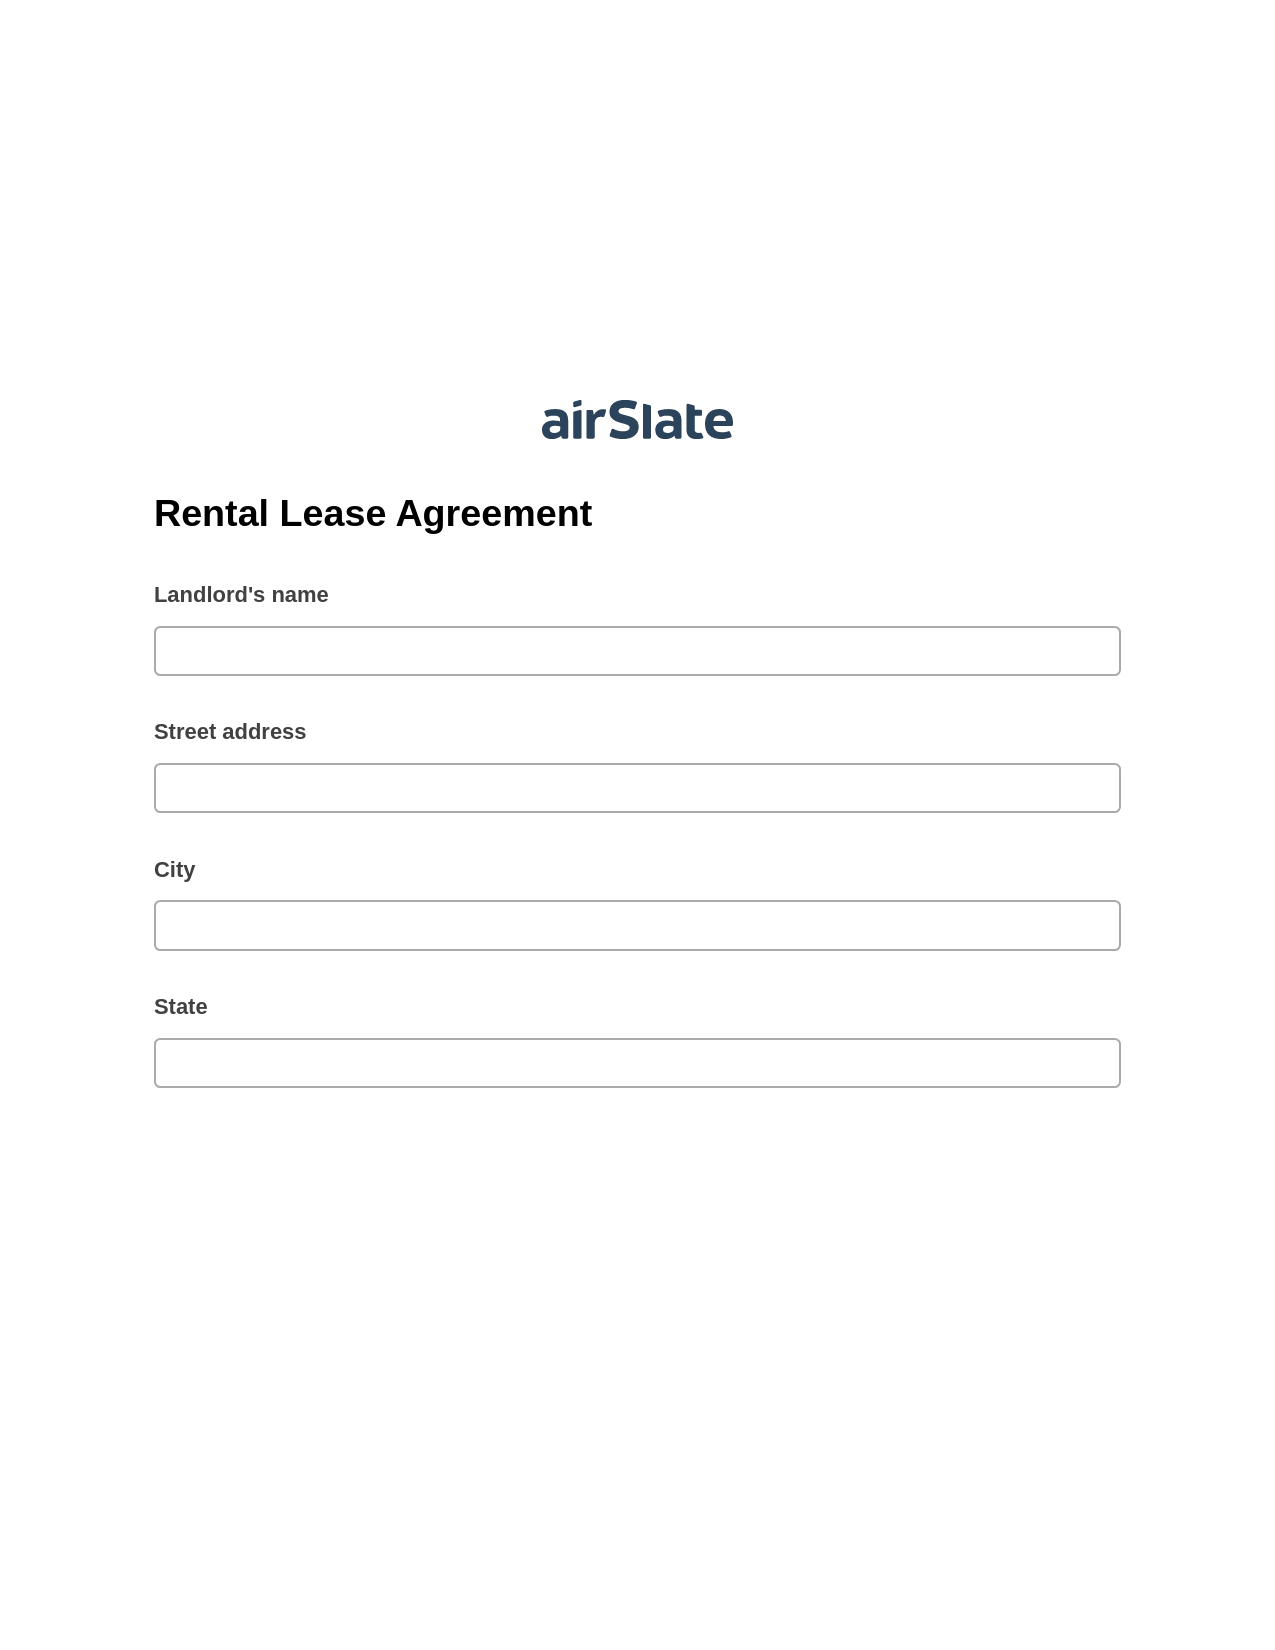 Rental Lease Agreement Pre-fill from MySQL Bot, Google Cloud Print Bot, Archive to SharePoint Folder Bot